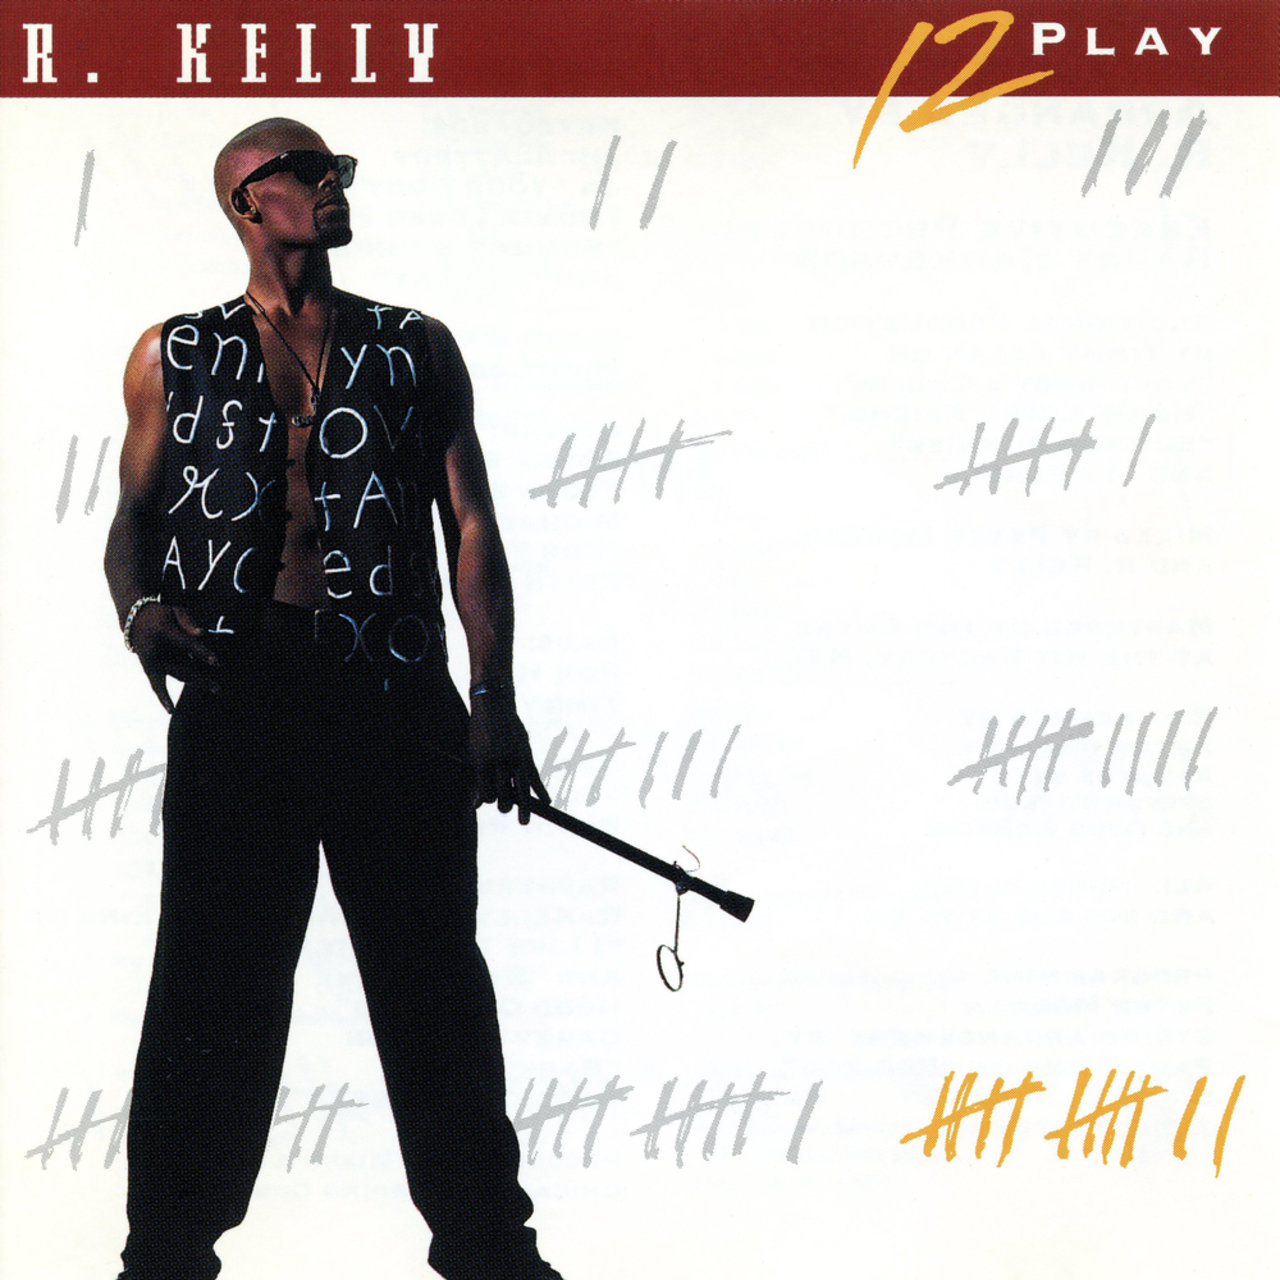 R. Kelly - 12 Play (Cover)